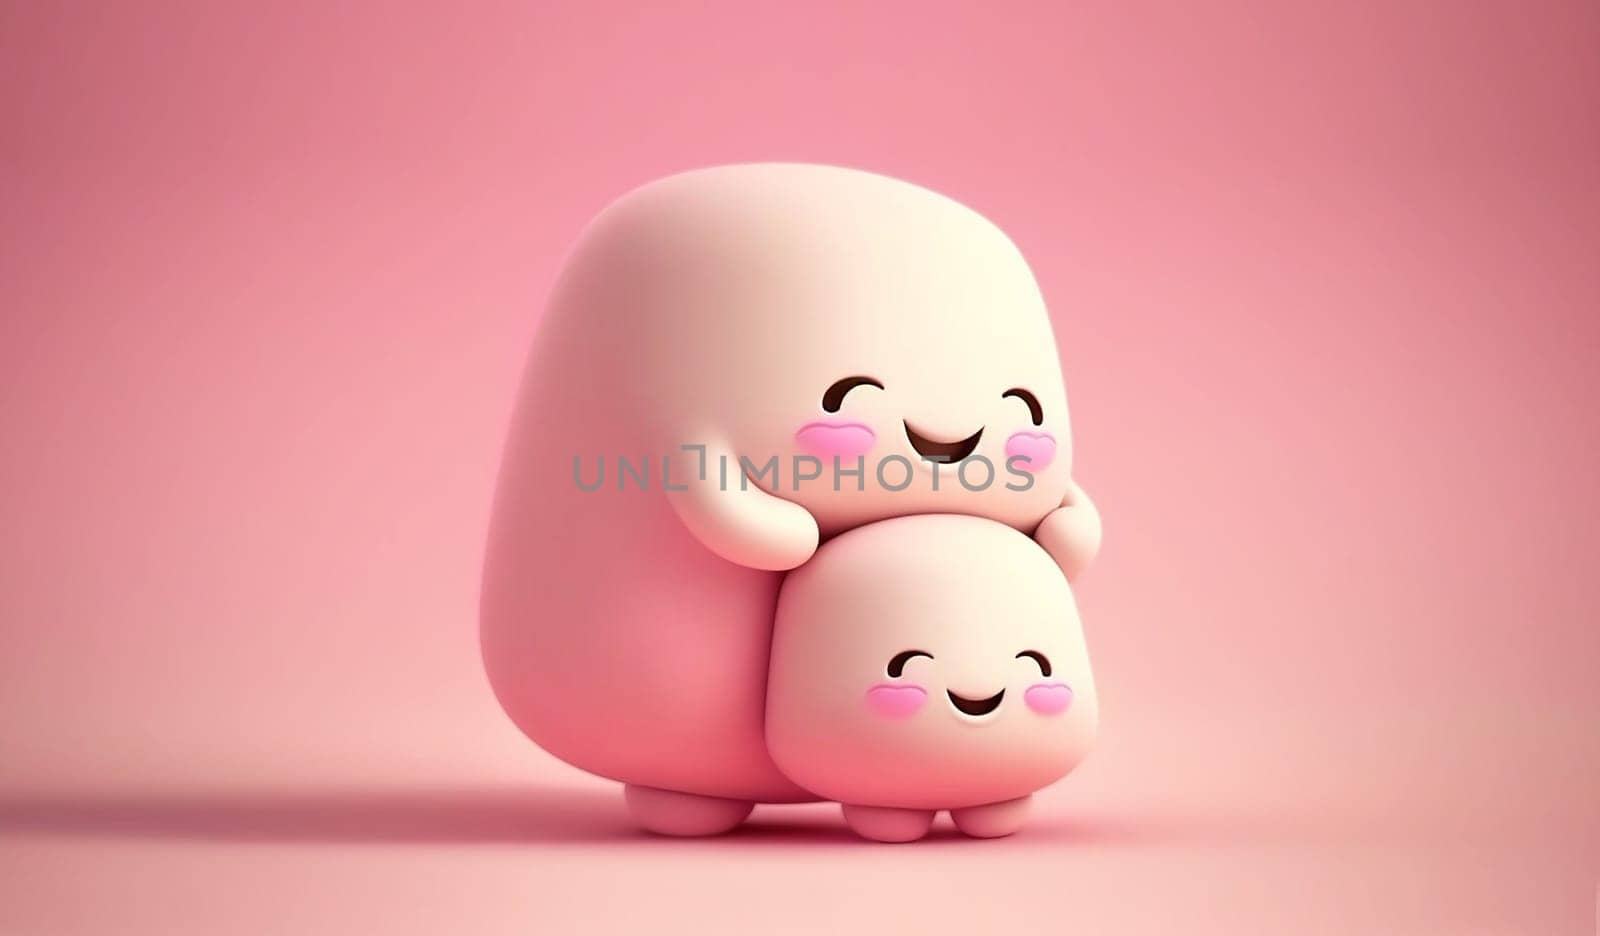 Lovely creatures embrace. Mothers hugs. Friendship. Cute abstract characters by natali_brill